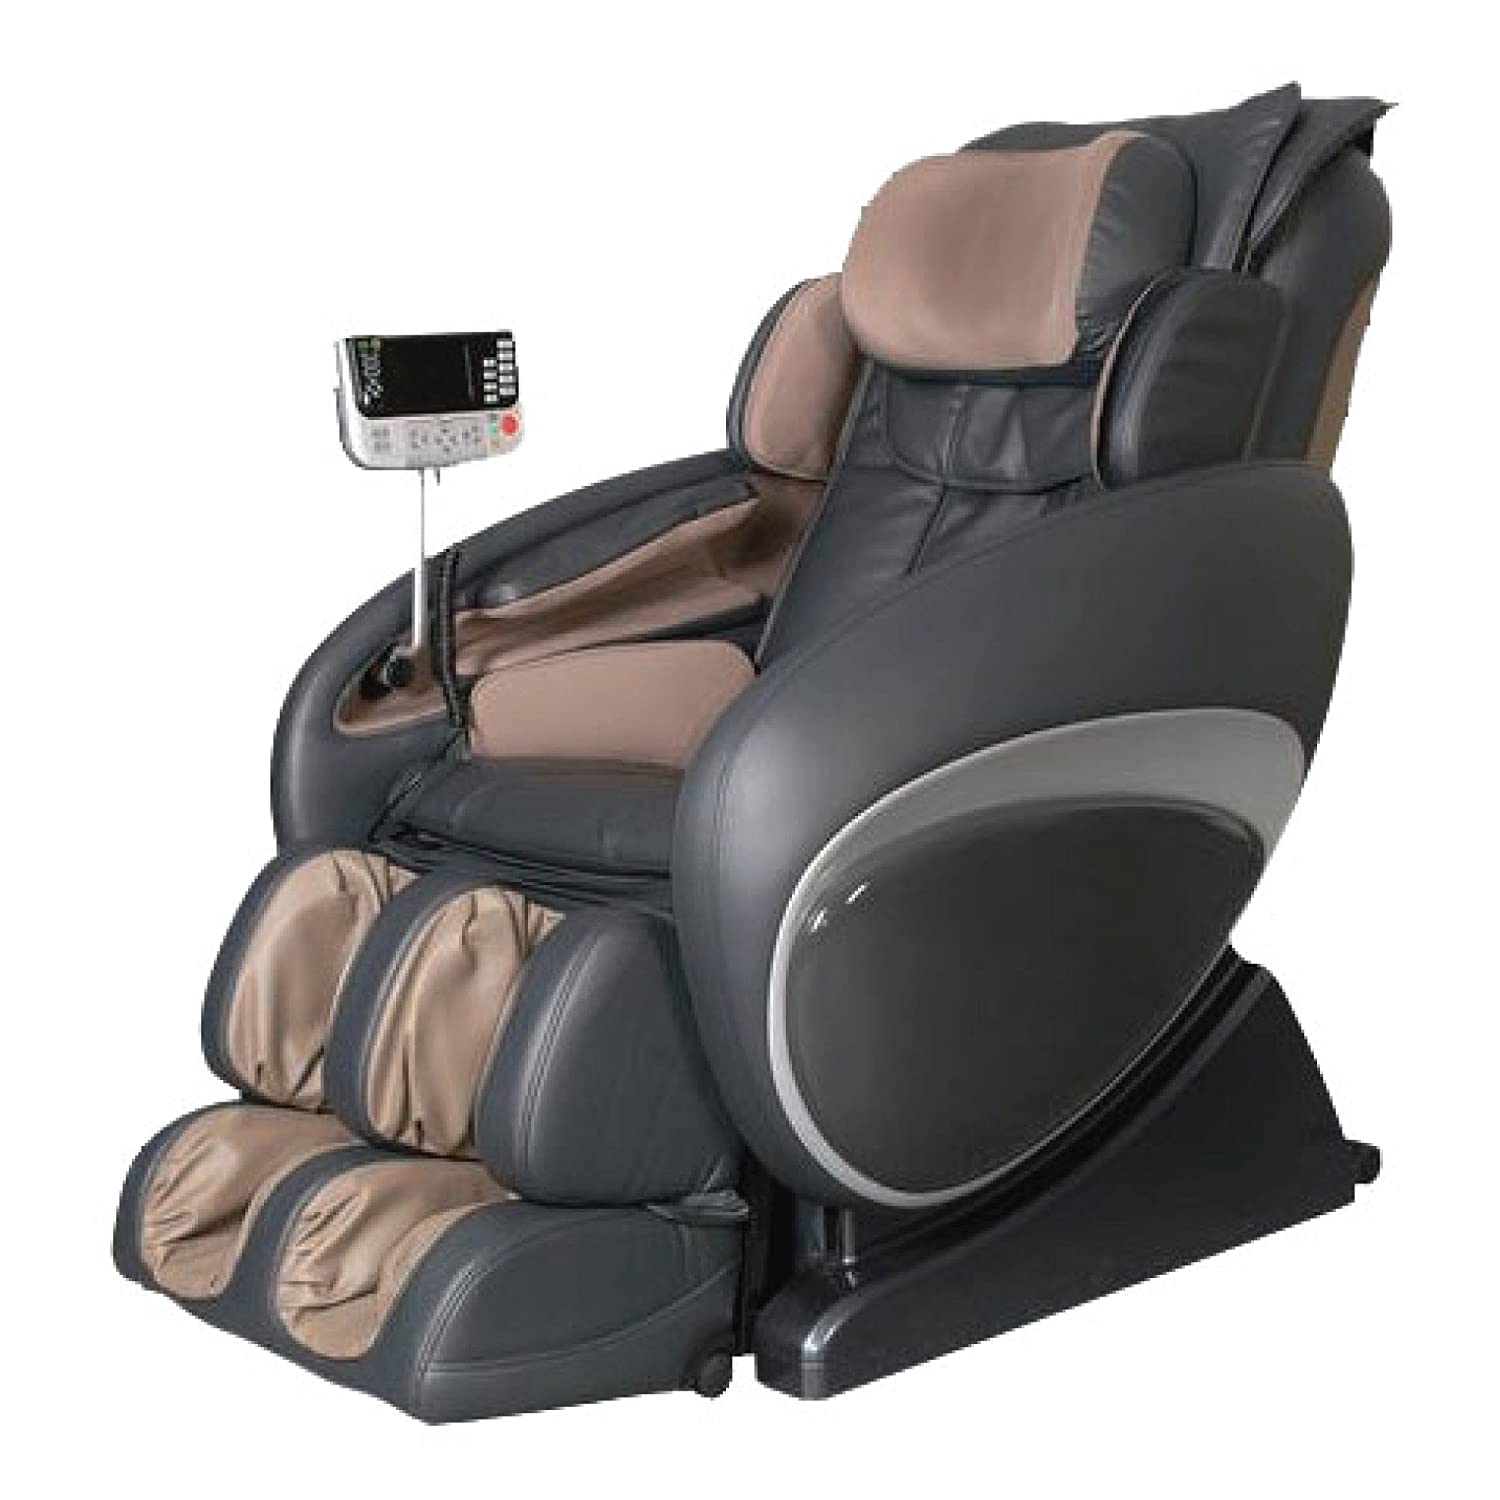 King Kong Massage Chair For Sale